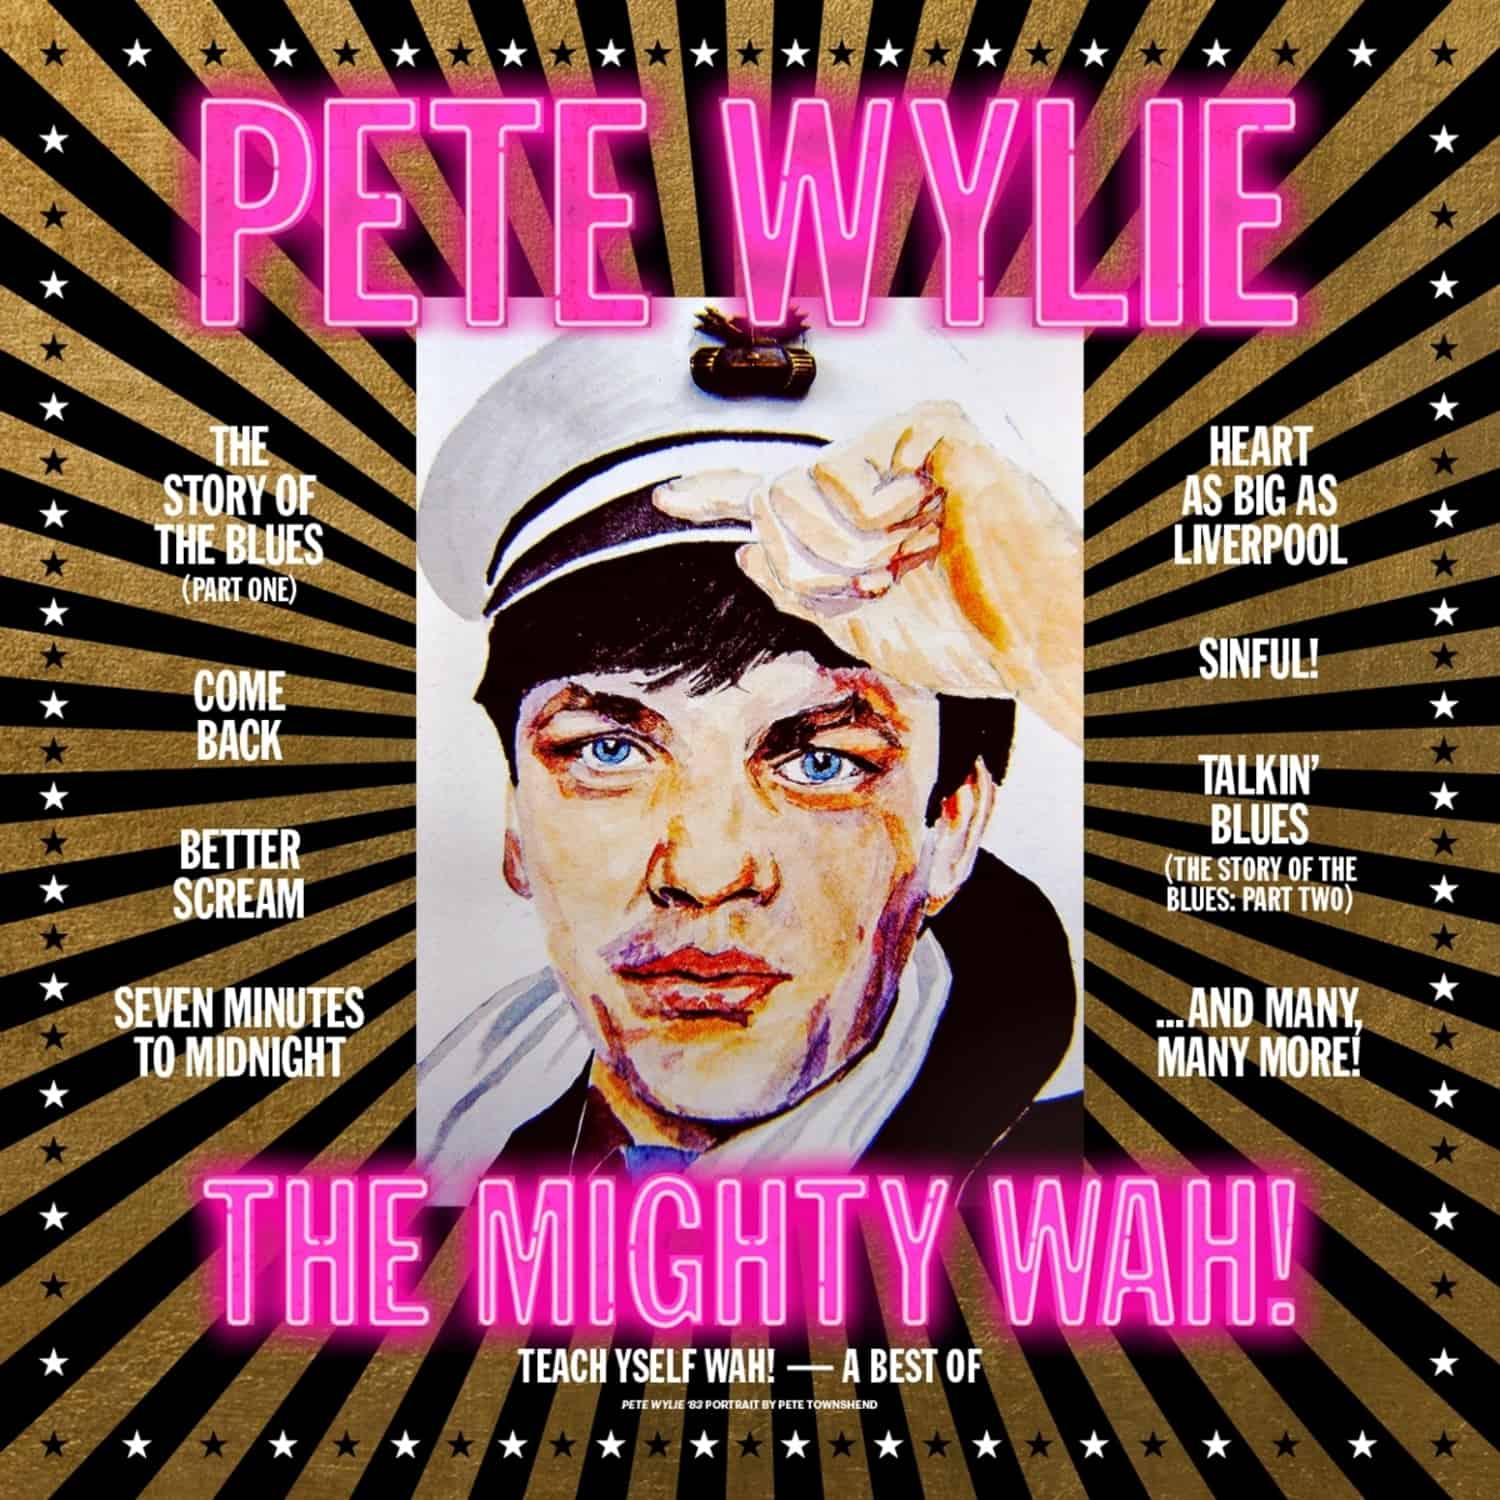 Pete Wylie & the Mighty Wah! - TEACH YSELF WAH! - THE BEST OF PETE WYLIE & THE MI 